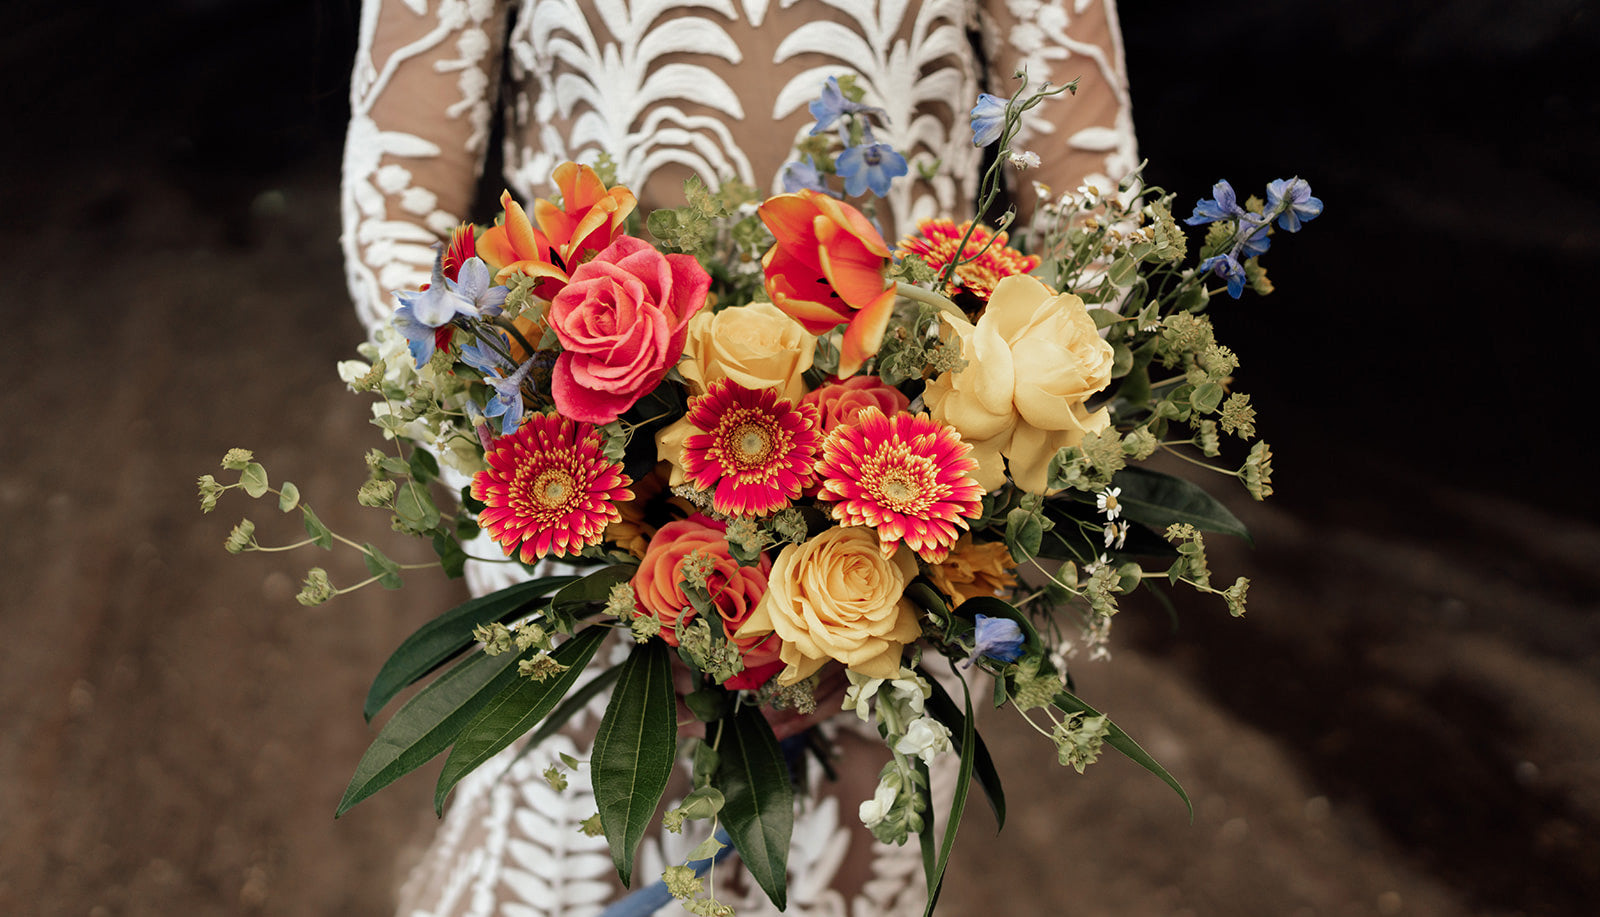 Bride holding a brightly colored bouquet of gerbera, roses and delphinium tied with blue ribbon.